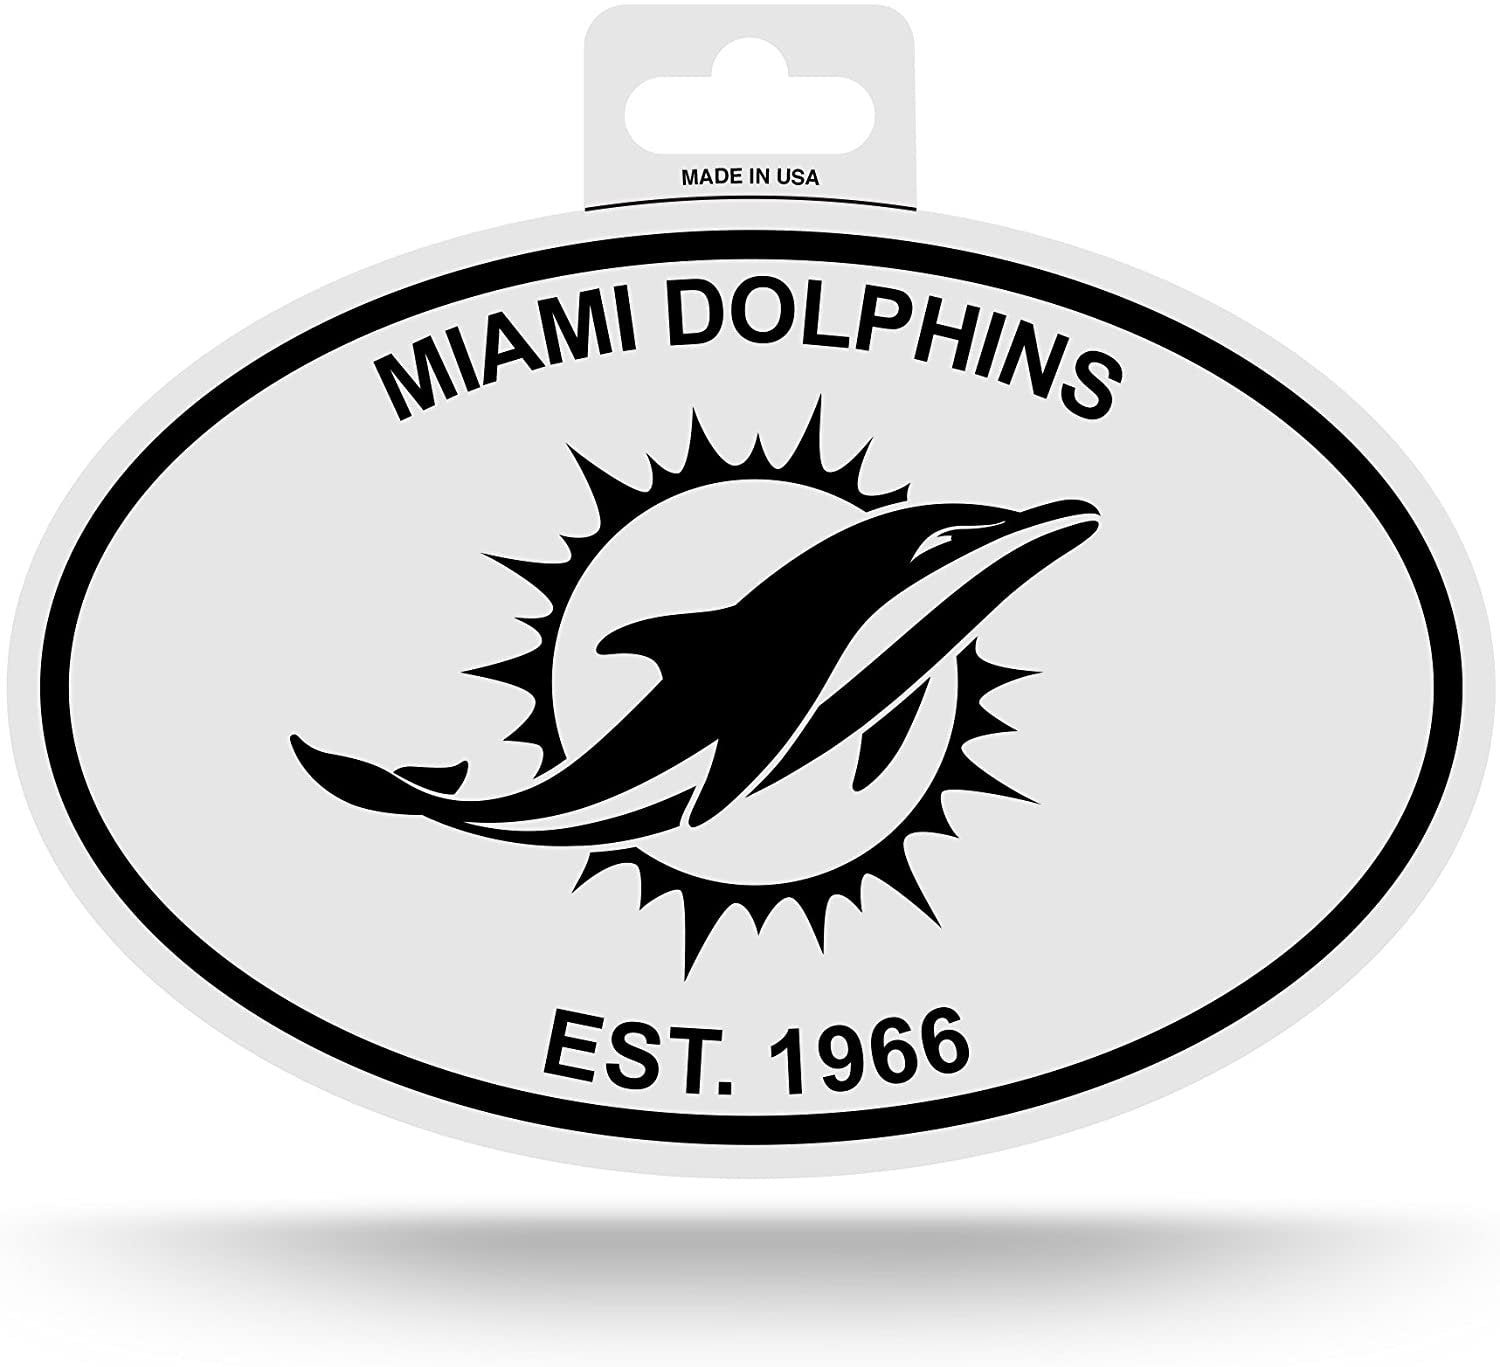 Miami Dolphins Black and White Team Logo Oval Sticker Decal, 3.75x5.75 Inch, Full Adhesive Backing